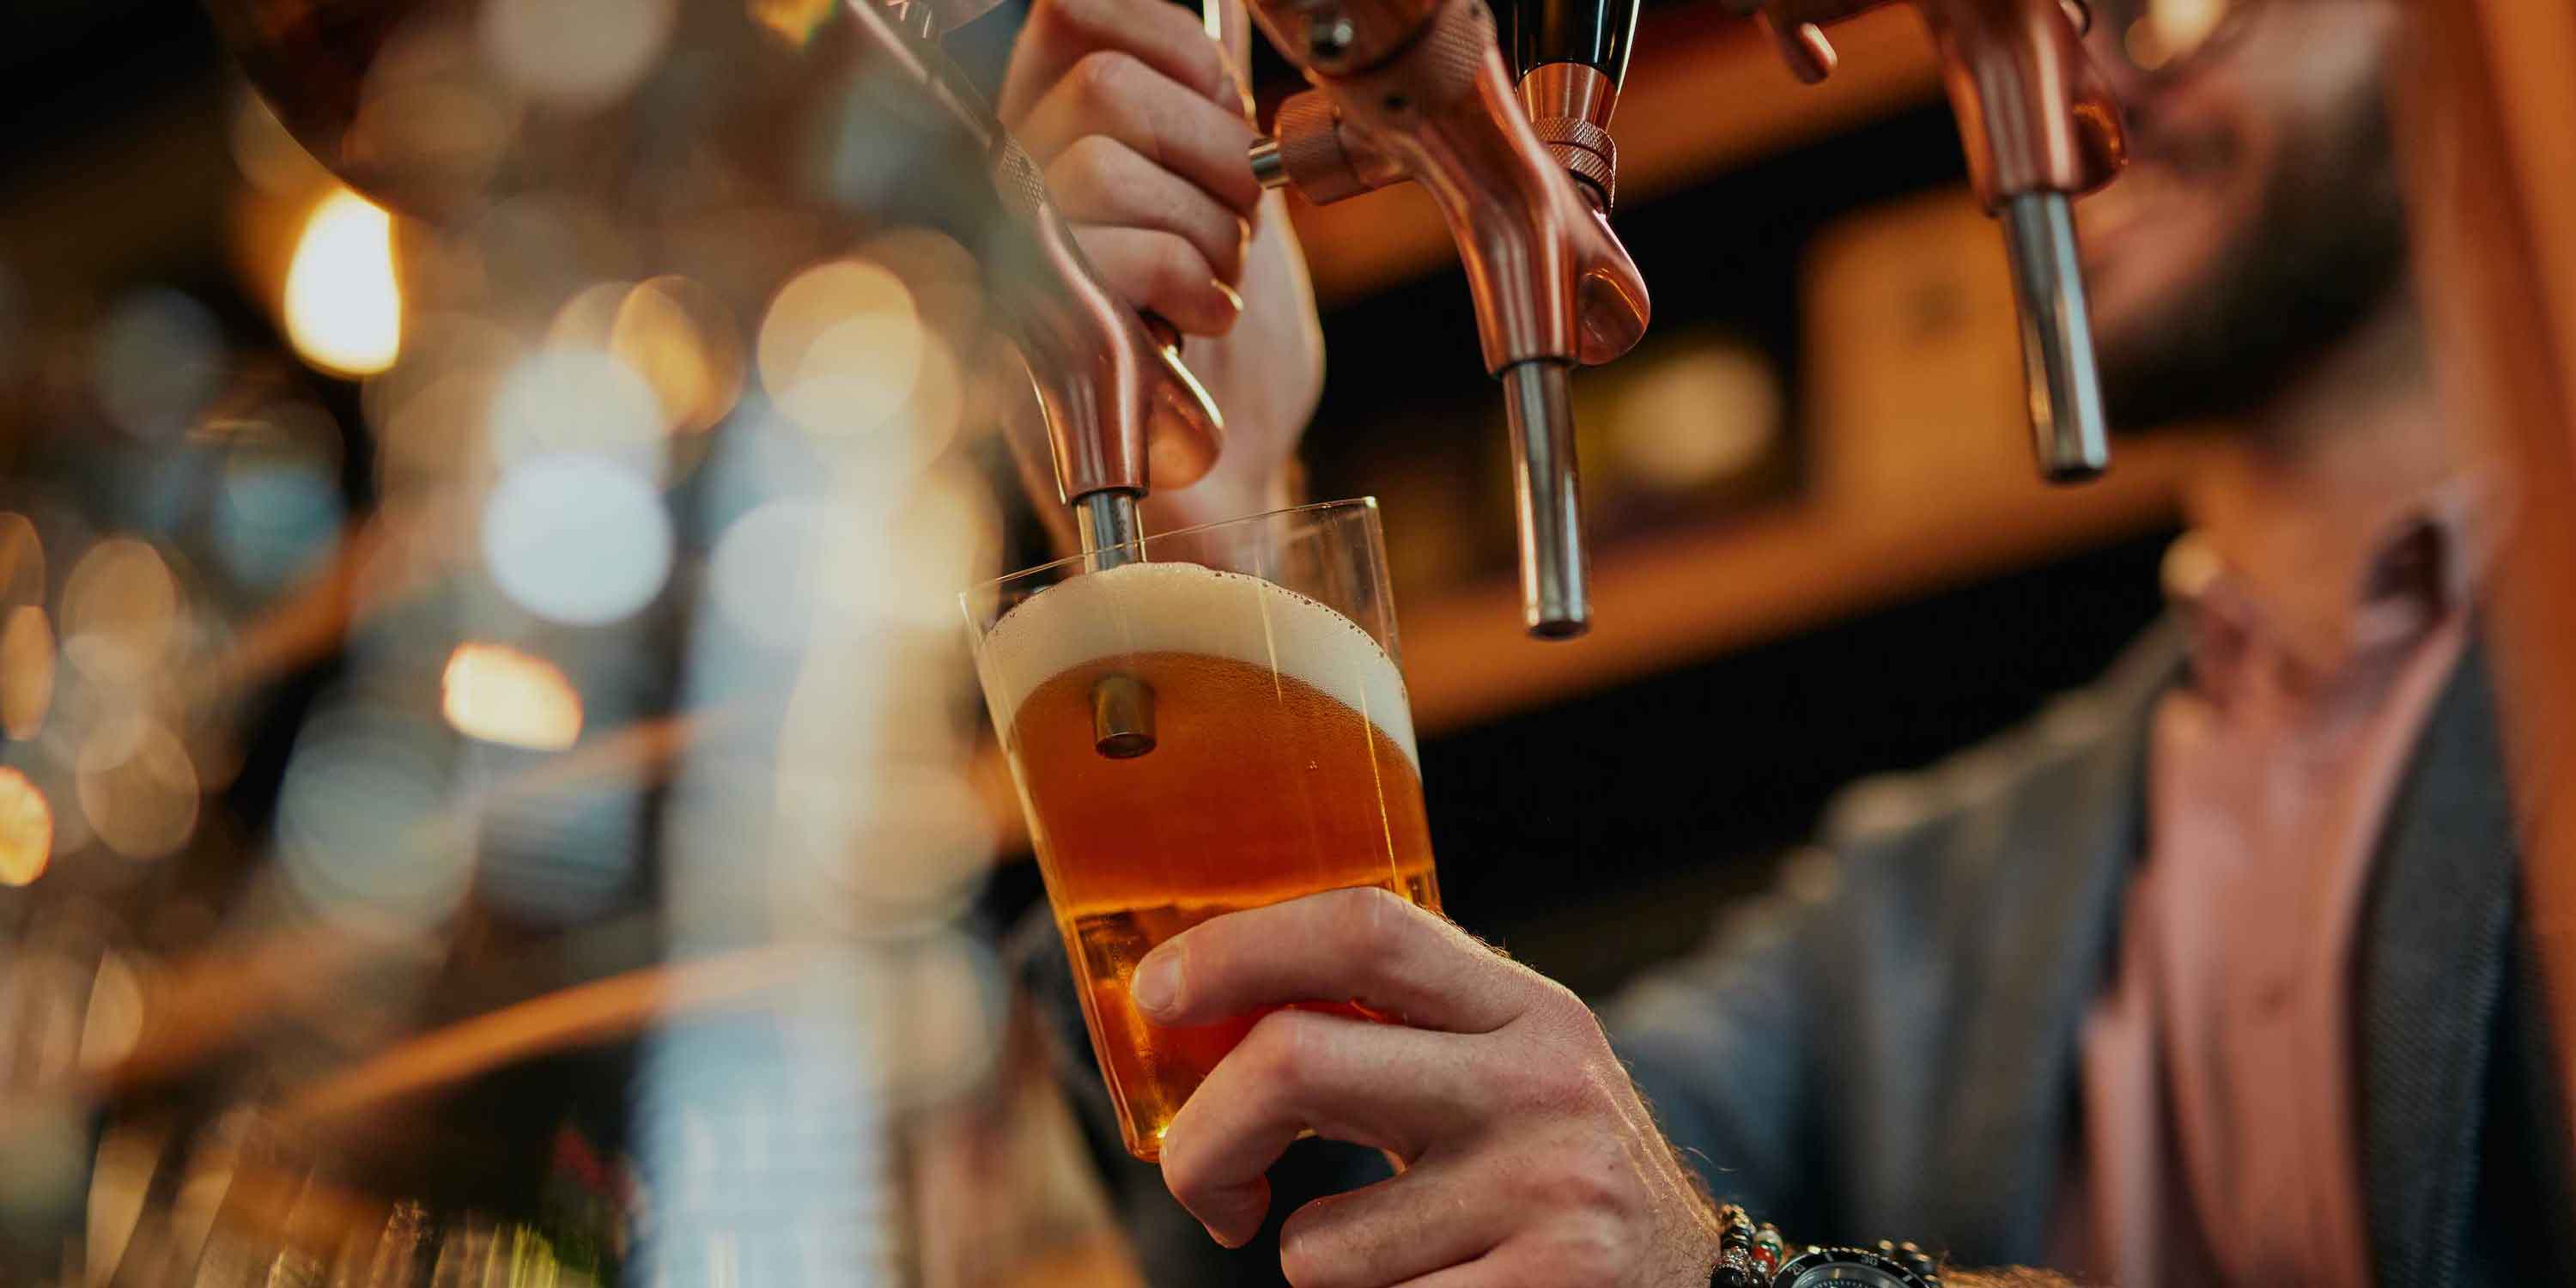 A draft beer being poured from the tap at a brewery